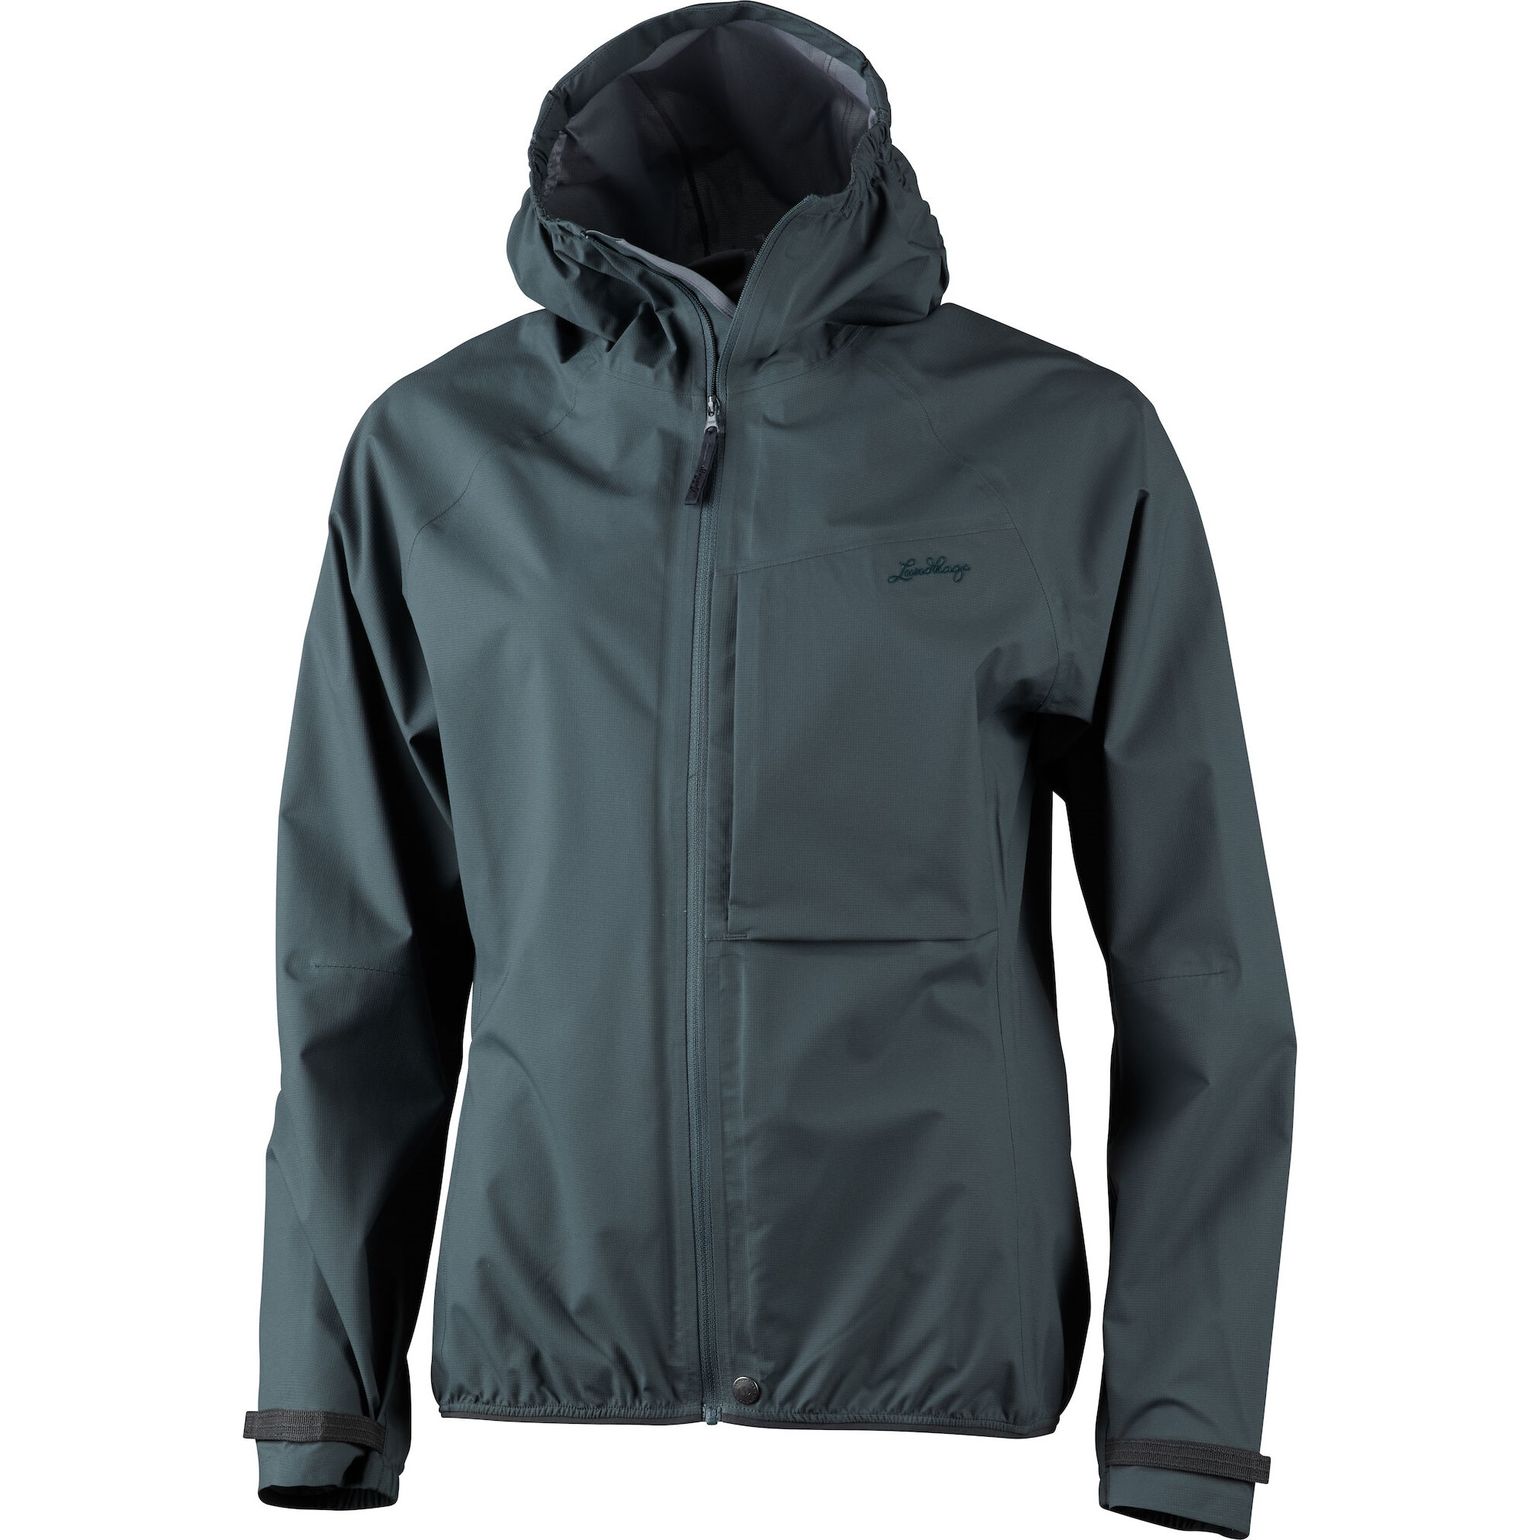 Lundhags Women's Lo Jacket Dark Agave